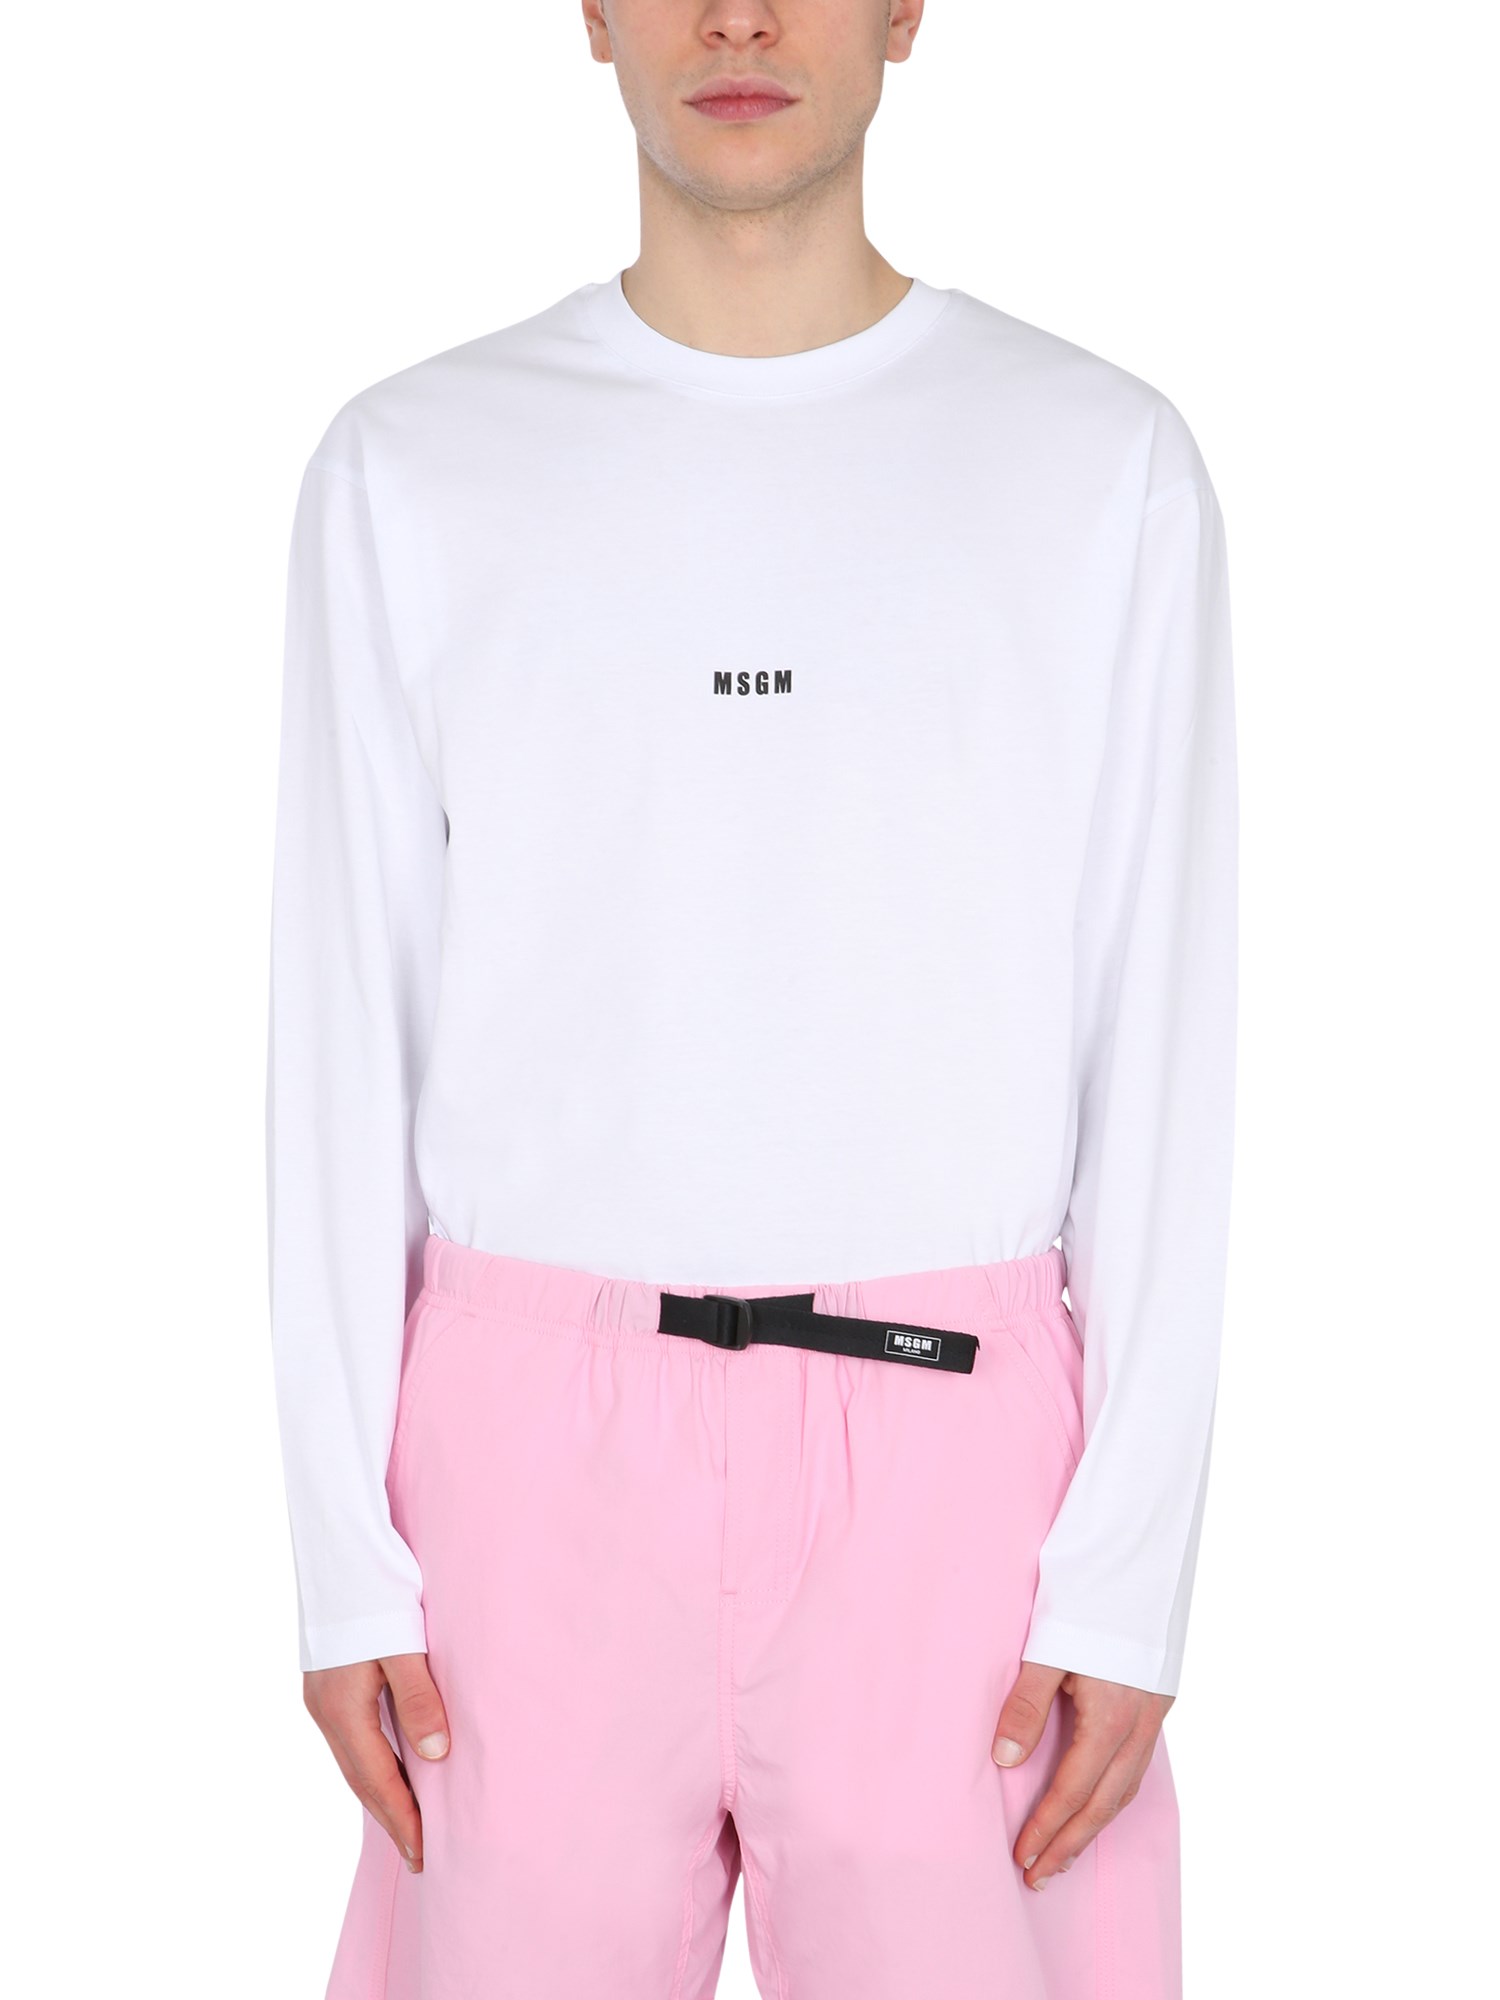 MSGM T-SHIRT WITH MICRO LOGO,203820